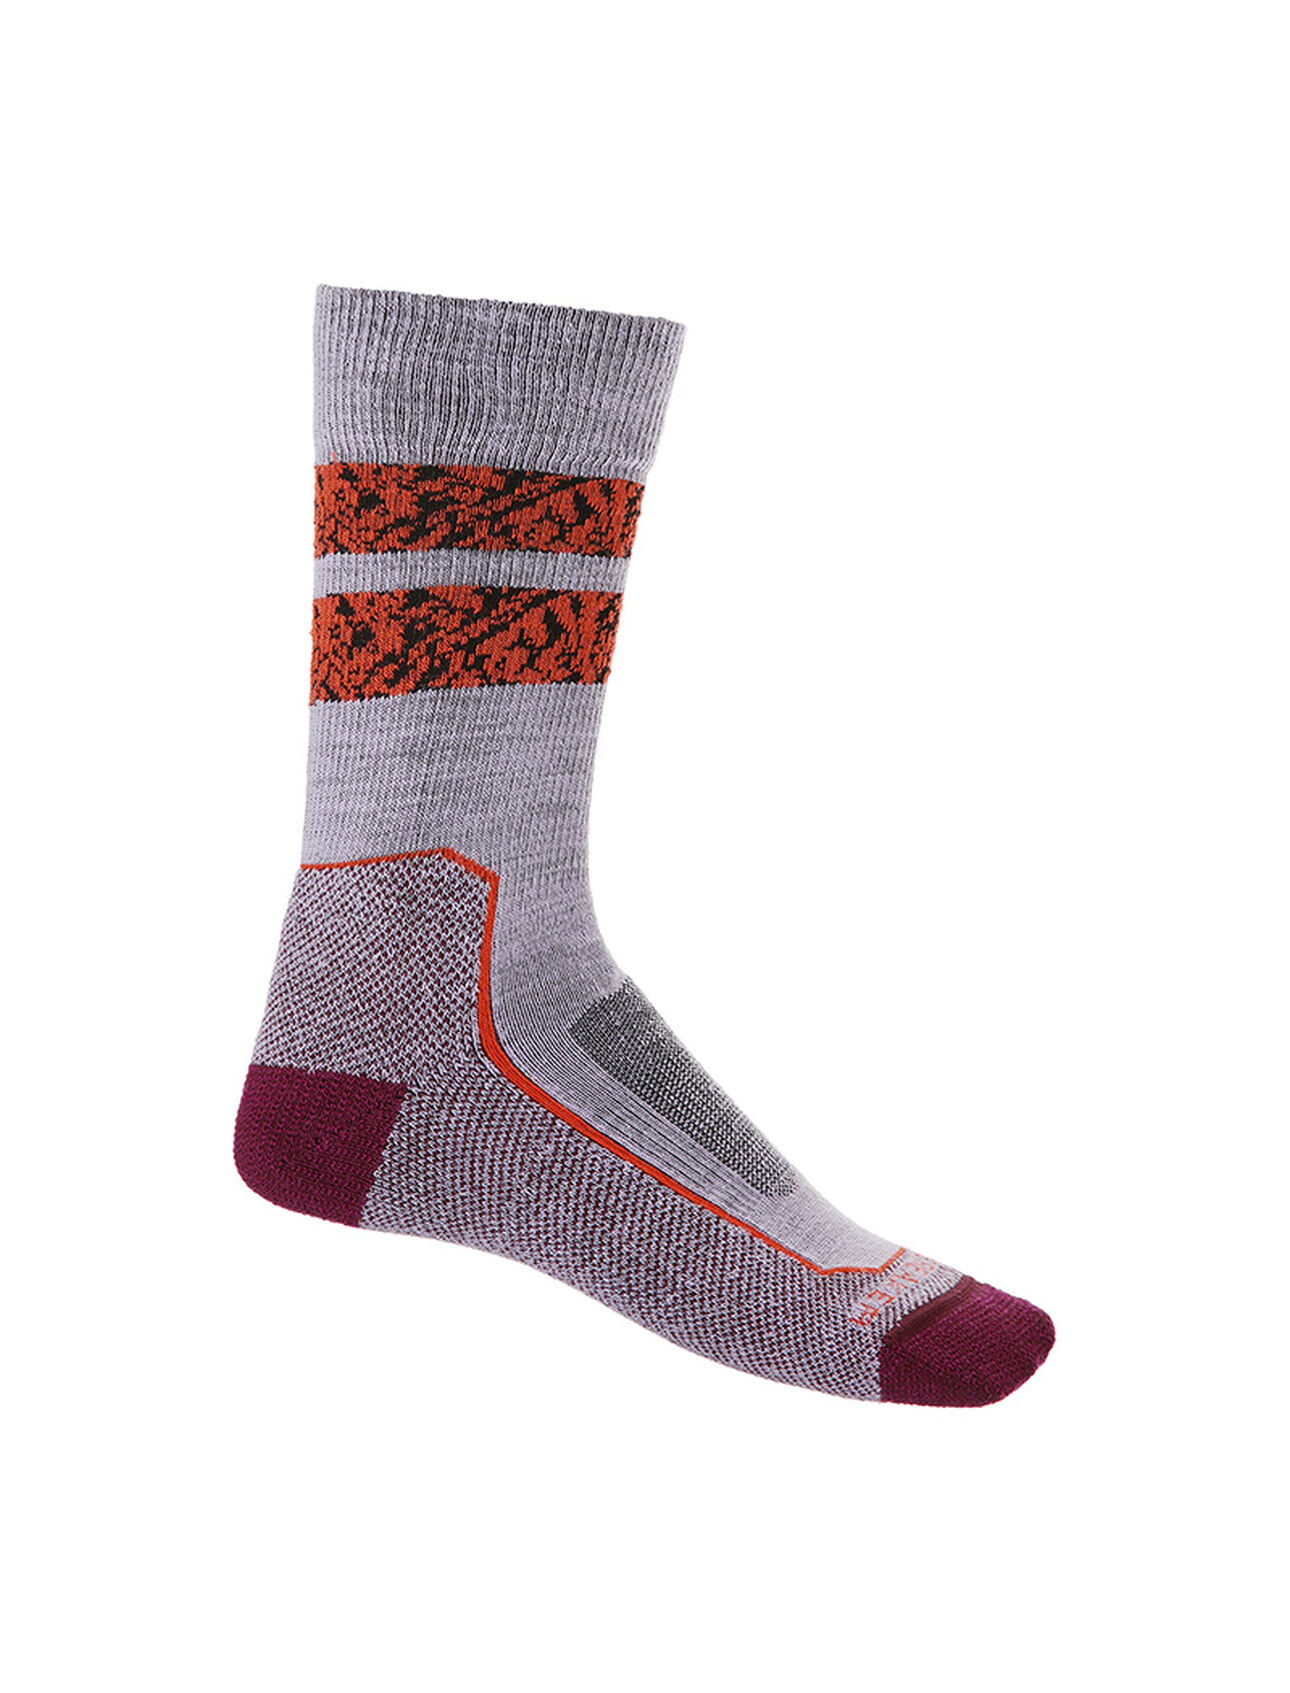 Womens Merino Hike+ Light Crew Socks Natural Summit Durable, crew-length merino socks that are stretchy and naturally odor-resistant with light cushion, the Hike+ Light Crew Natural Summit socks feature an anatomical sculpted design for added support on day hikes and backpacking  trips.